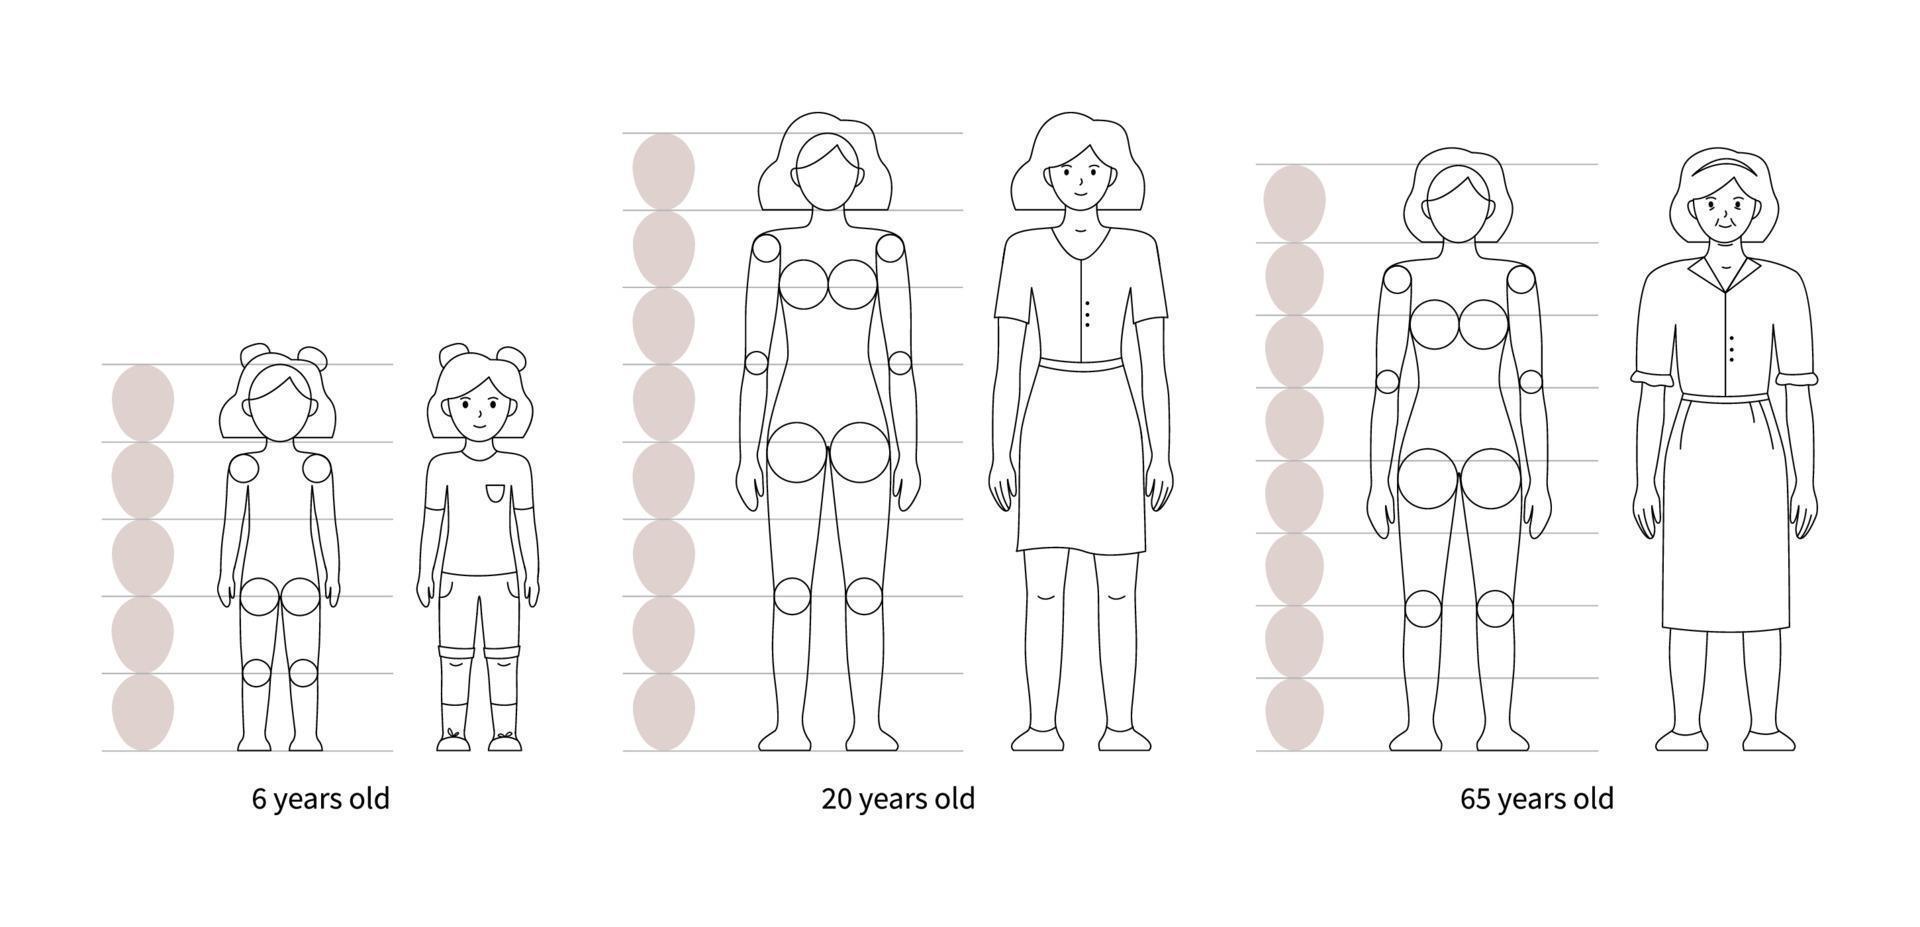 How to draw a woman at different ages anatomy vector